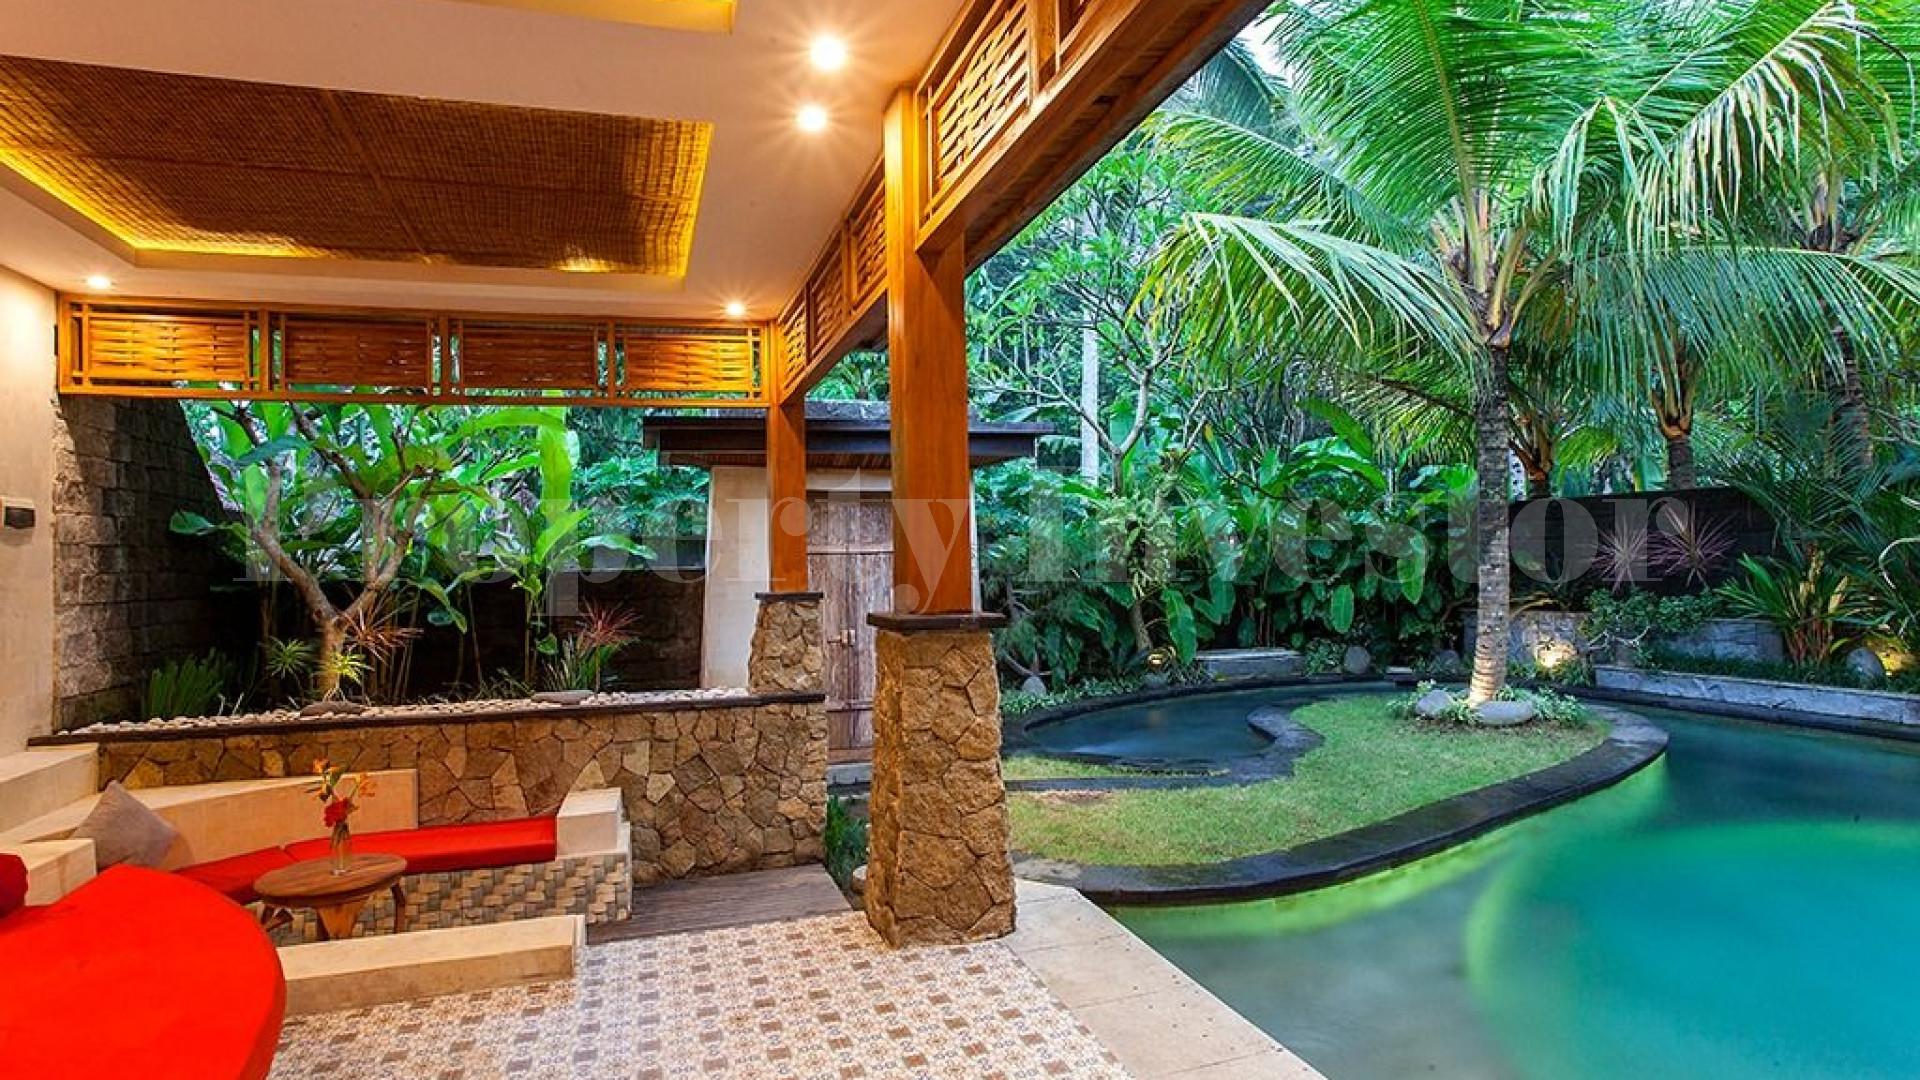 Perfectly Located 4 Villa/8 Bedroom Traditional Boutique Hotel for Sale in North Ubud, Bali